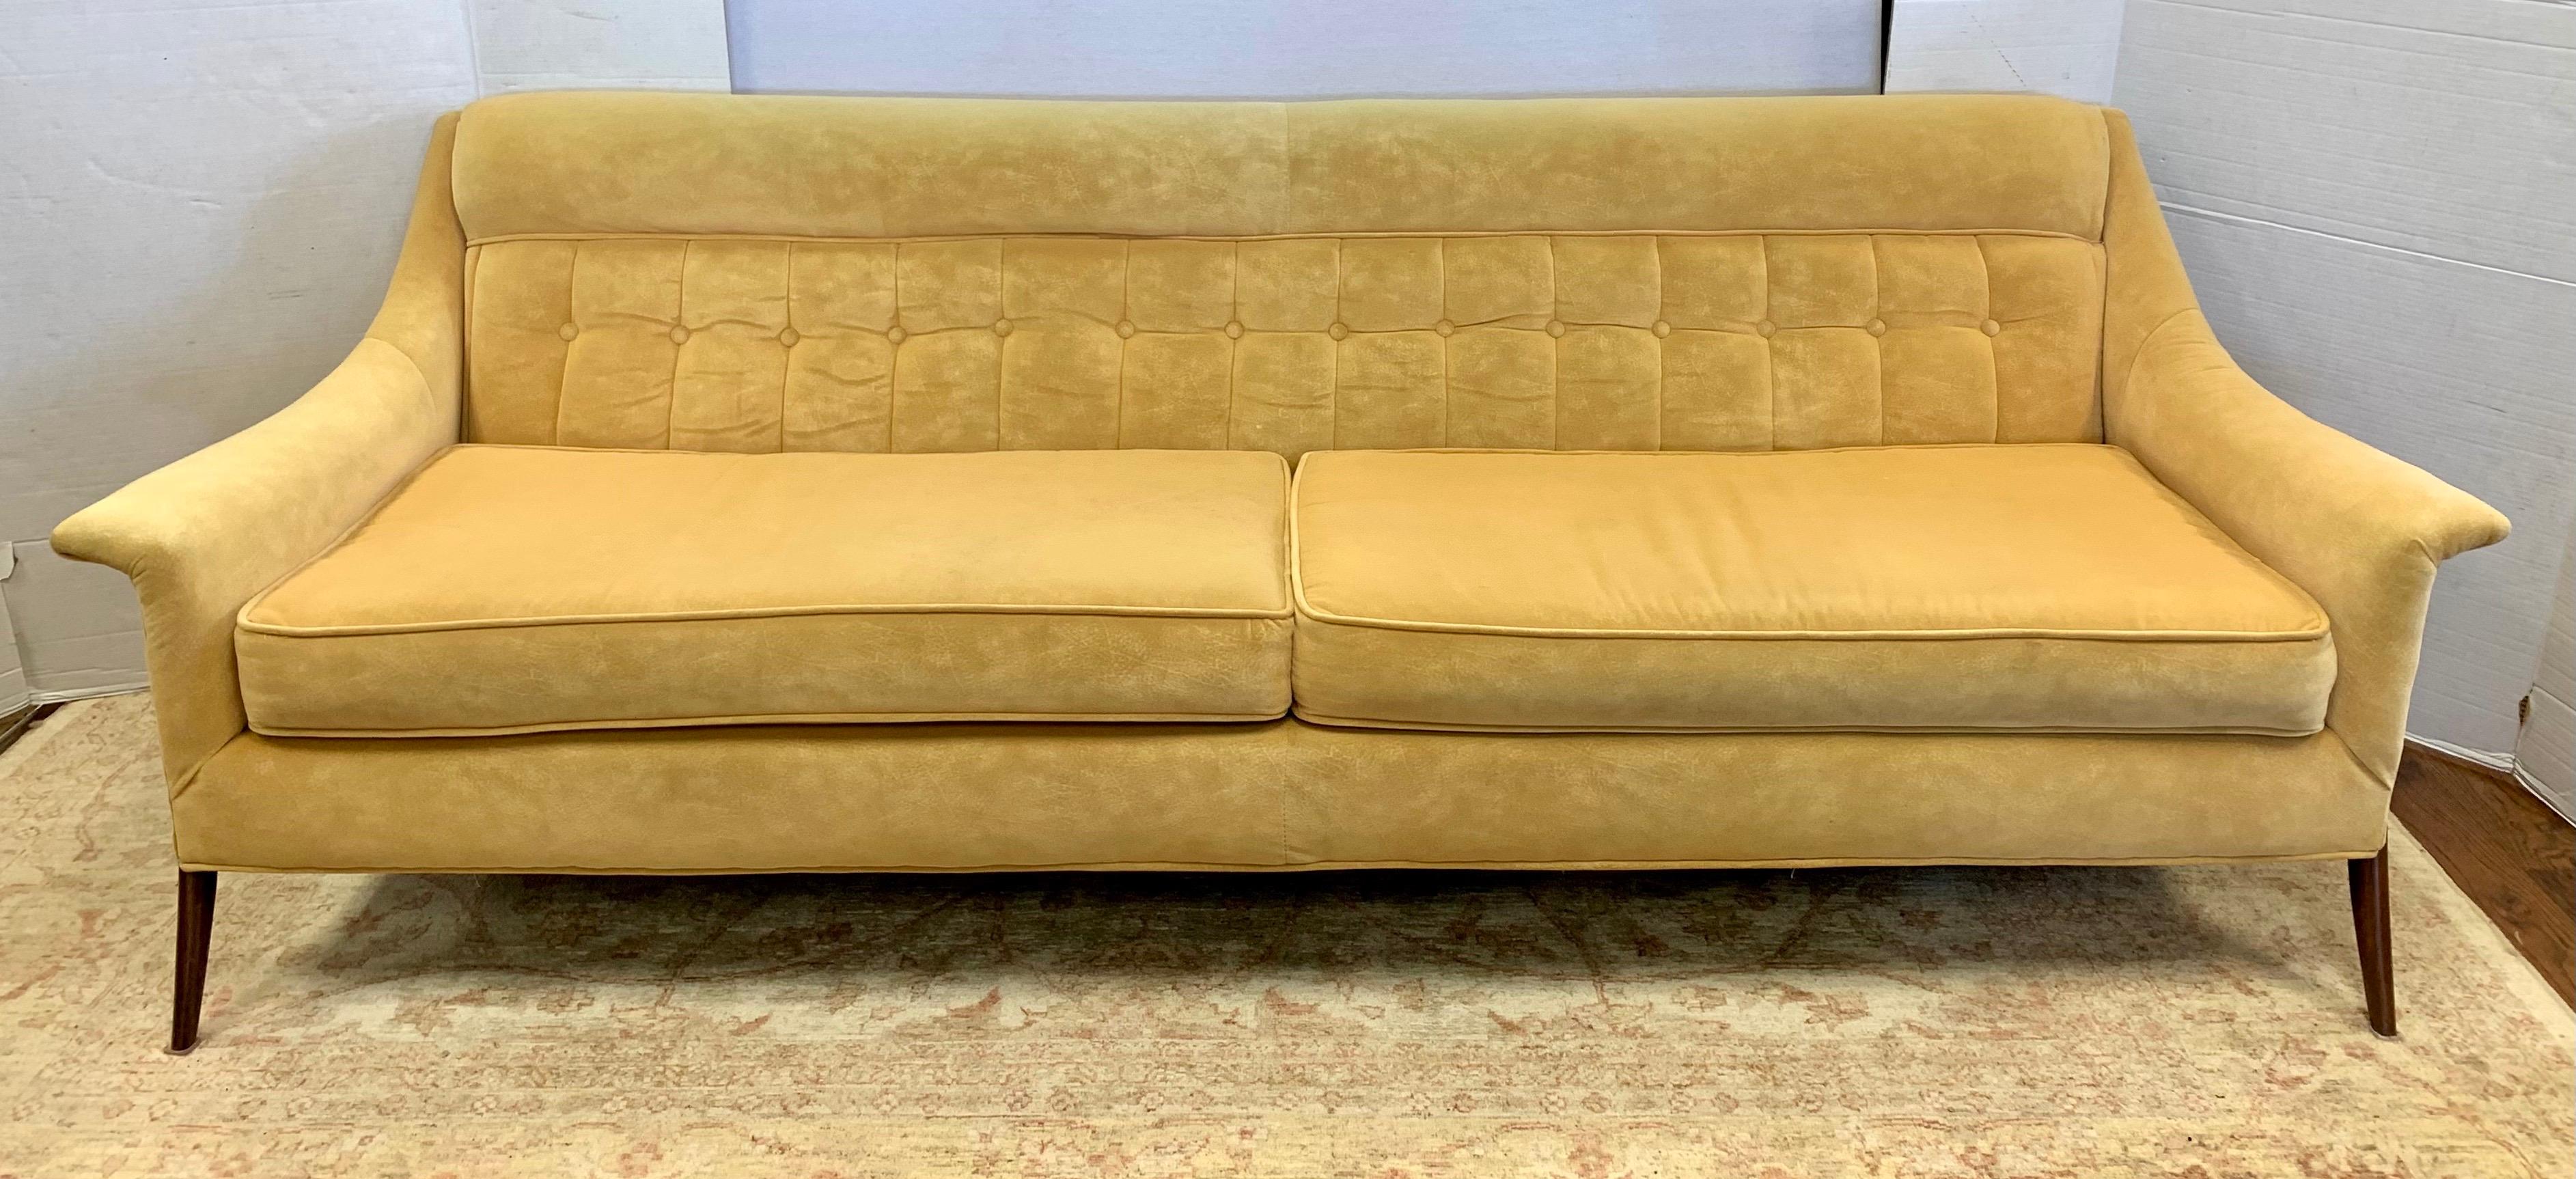 Mid-Century Modern Midcentury Danish Modern Tufted Sculptural Sofa with Ultra Suede Fabric